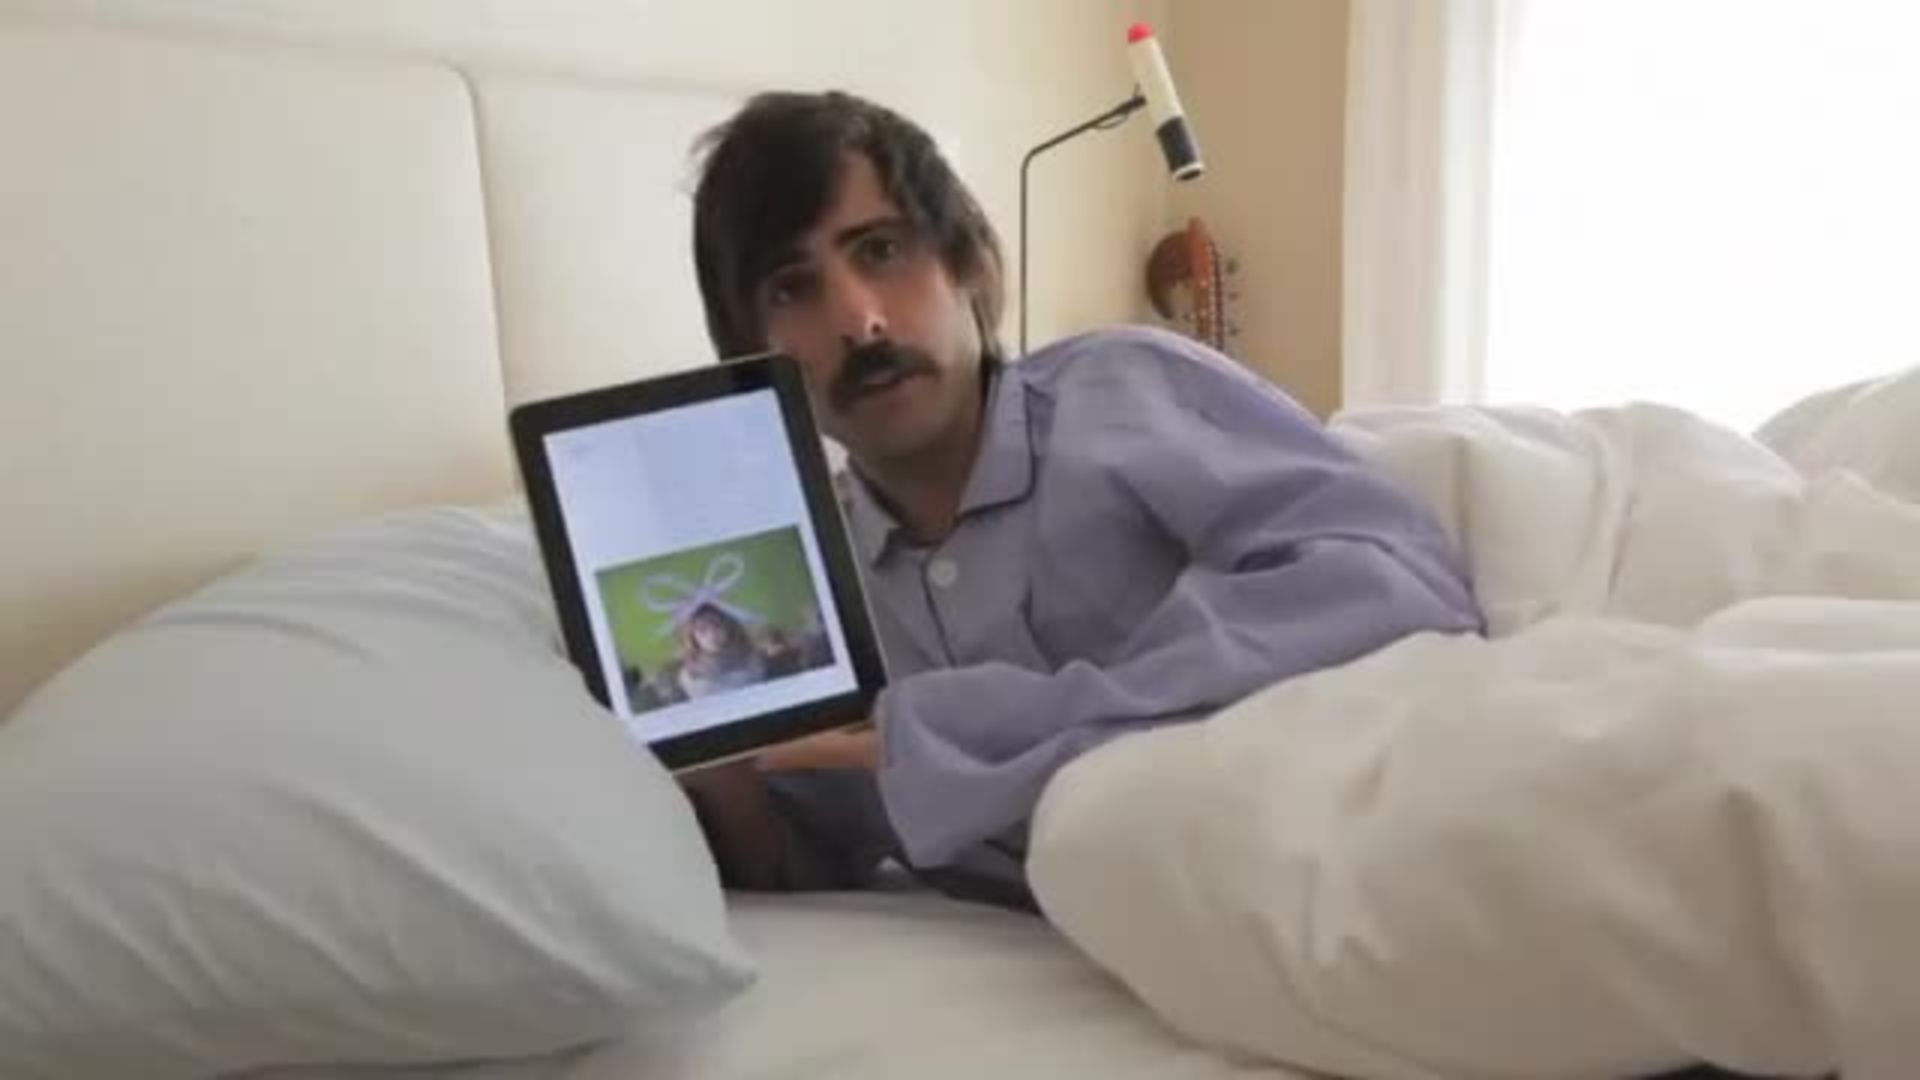 Watch Behind The Scenes Introducing The New Yorker Ipad App The New Yorker Video Cne Newyorker Com The New Yorker